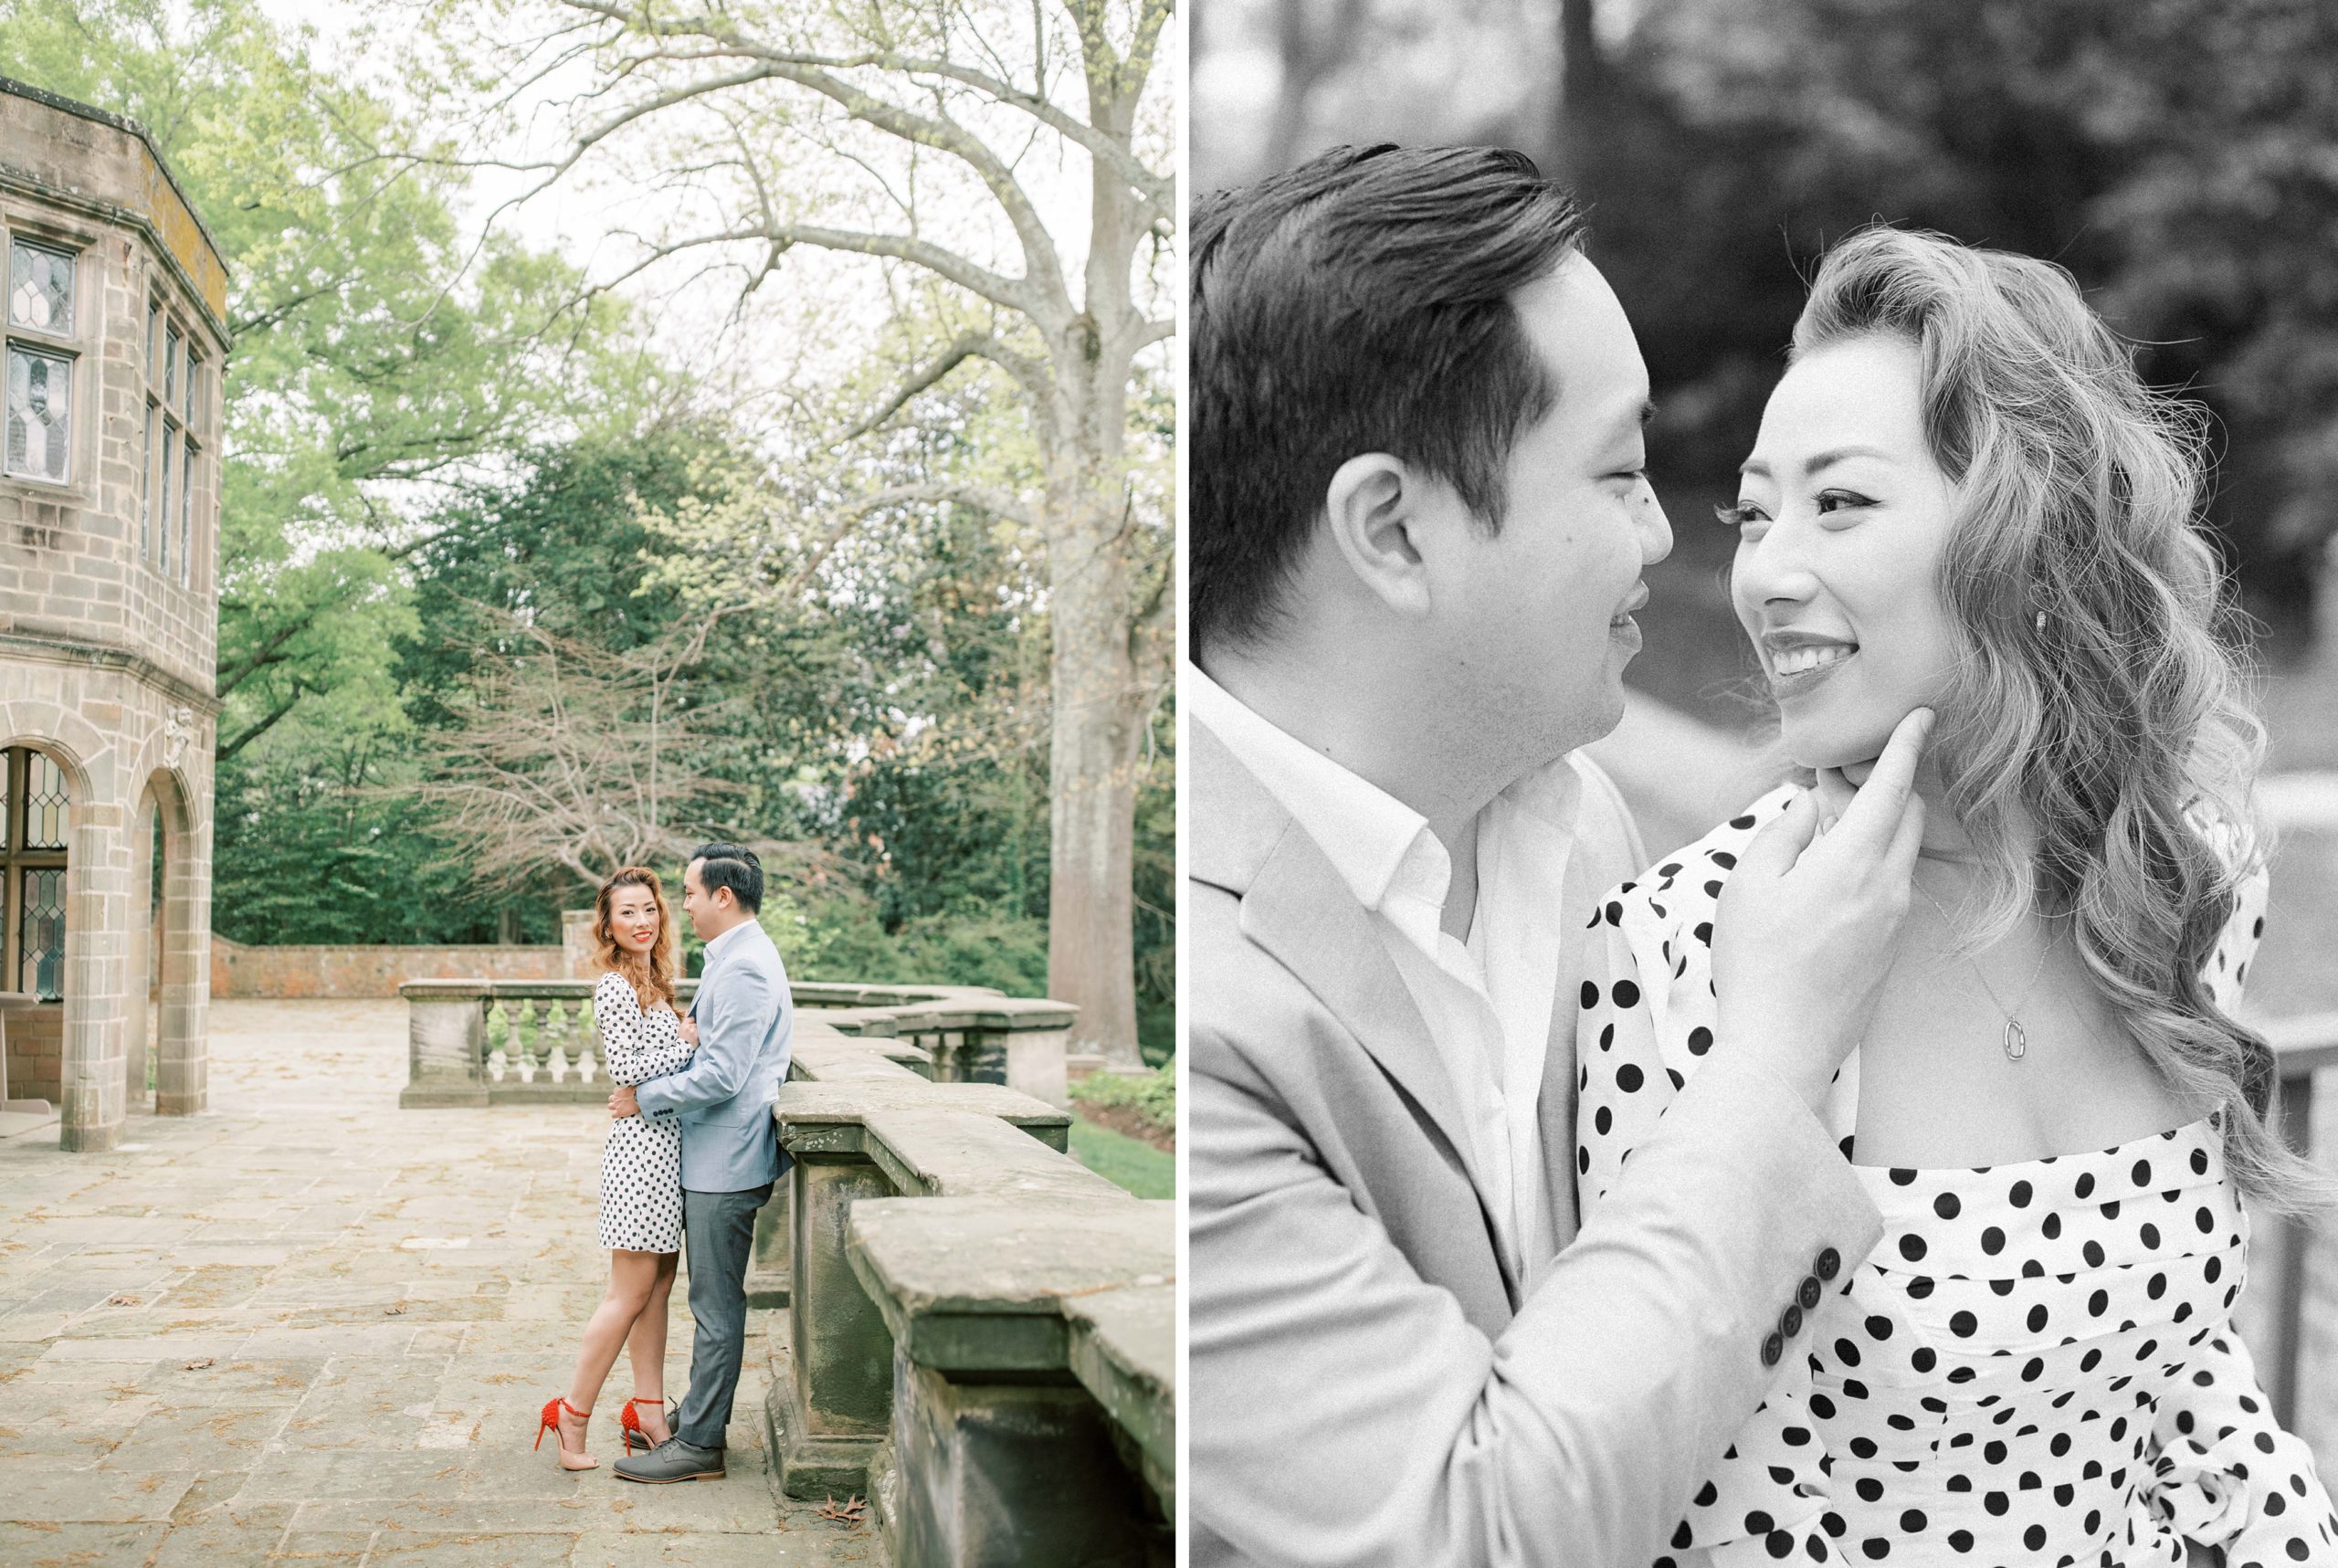 A stylish and romantic engagement session shot on film at the historic Virginia House located in Richmond, VA.